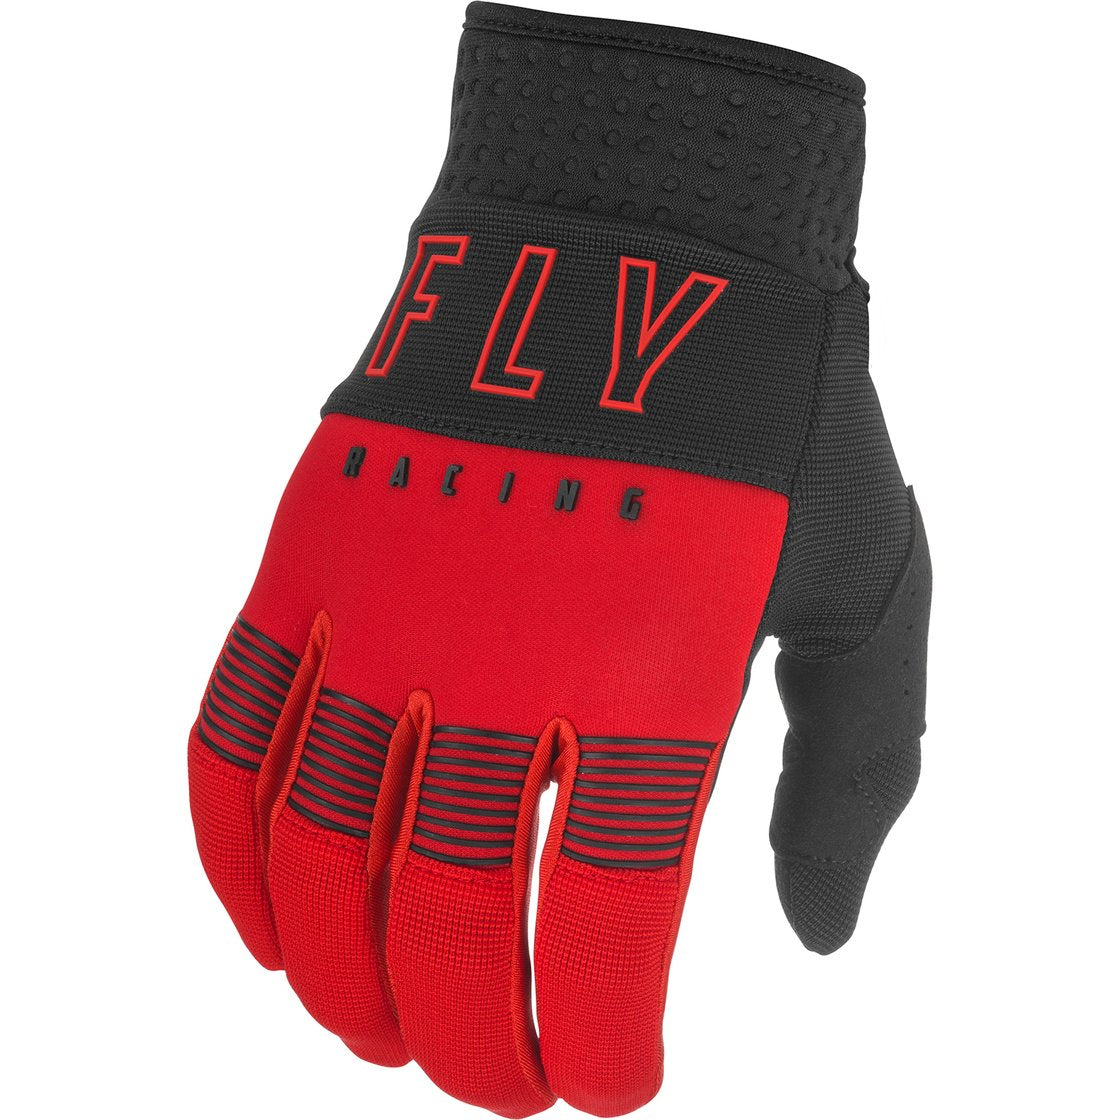 FLY RACING F-16 2021 GLOVES